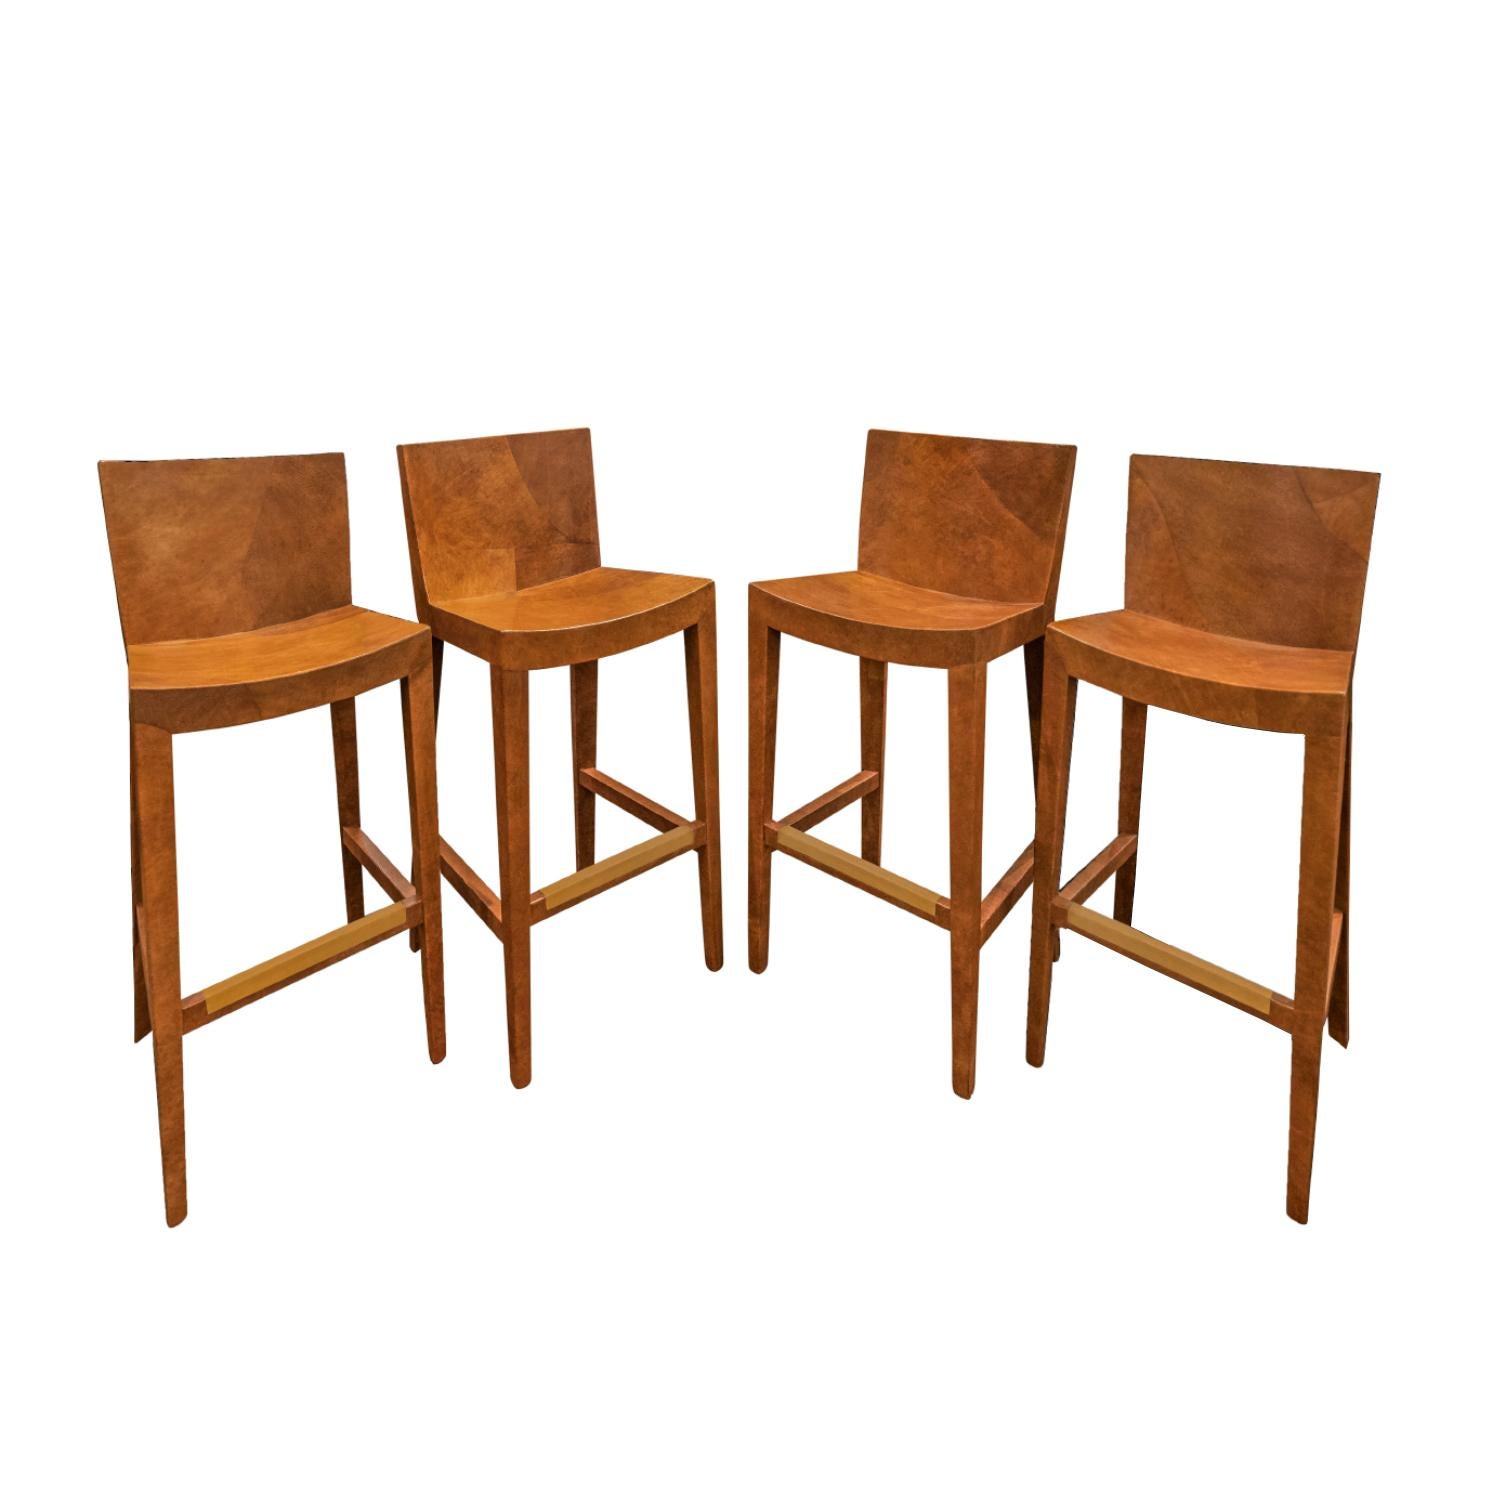 Set of 4 exceptional “J.M.F. Barstools” in brown leather with brushed brass foot rests by Karl Springer, American 1986 (signed and dated on bottom “Karl Springer 1986”). The craftsmanship on these bar stools is superb. The seats and backs gently